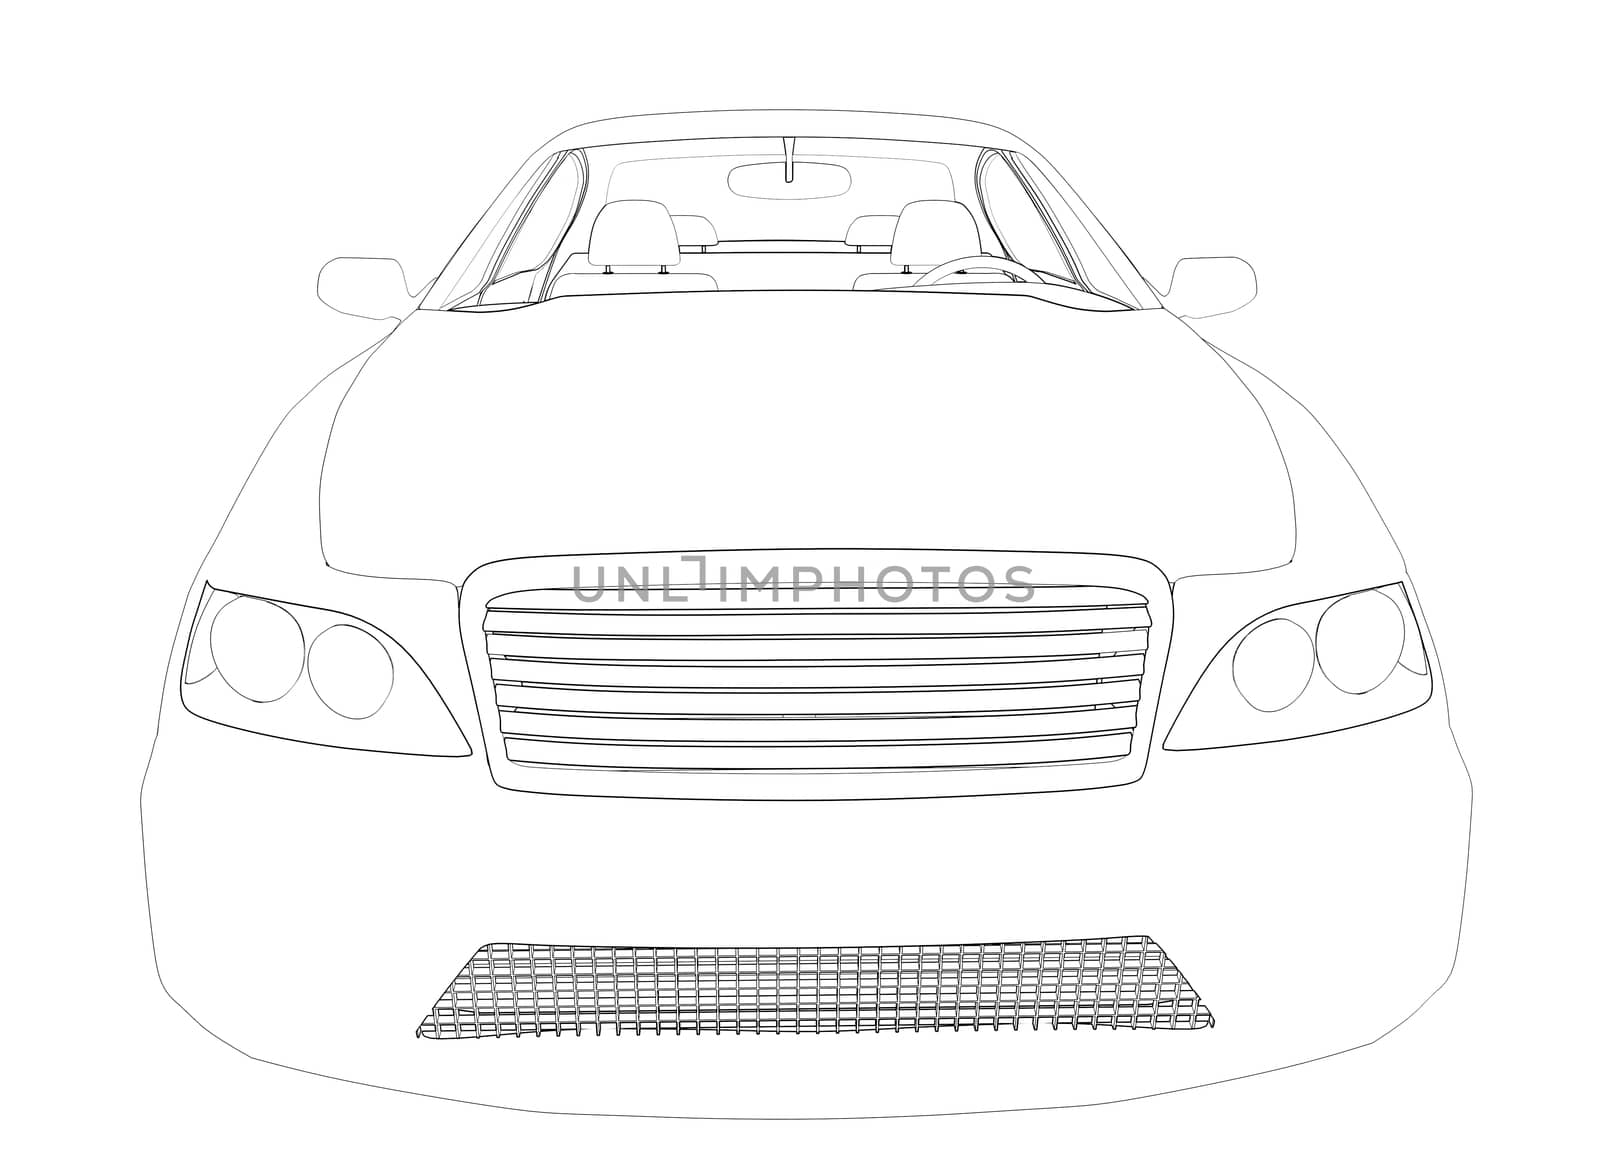 Graphic design of car model on isolated white background, front view